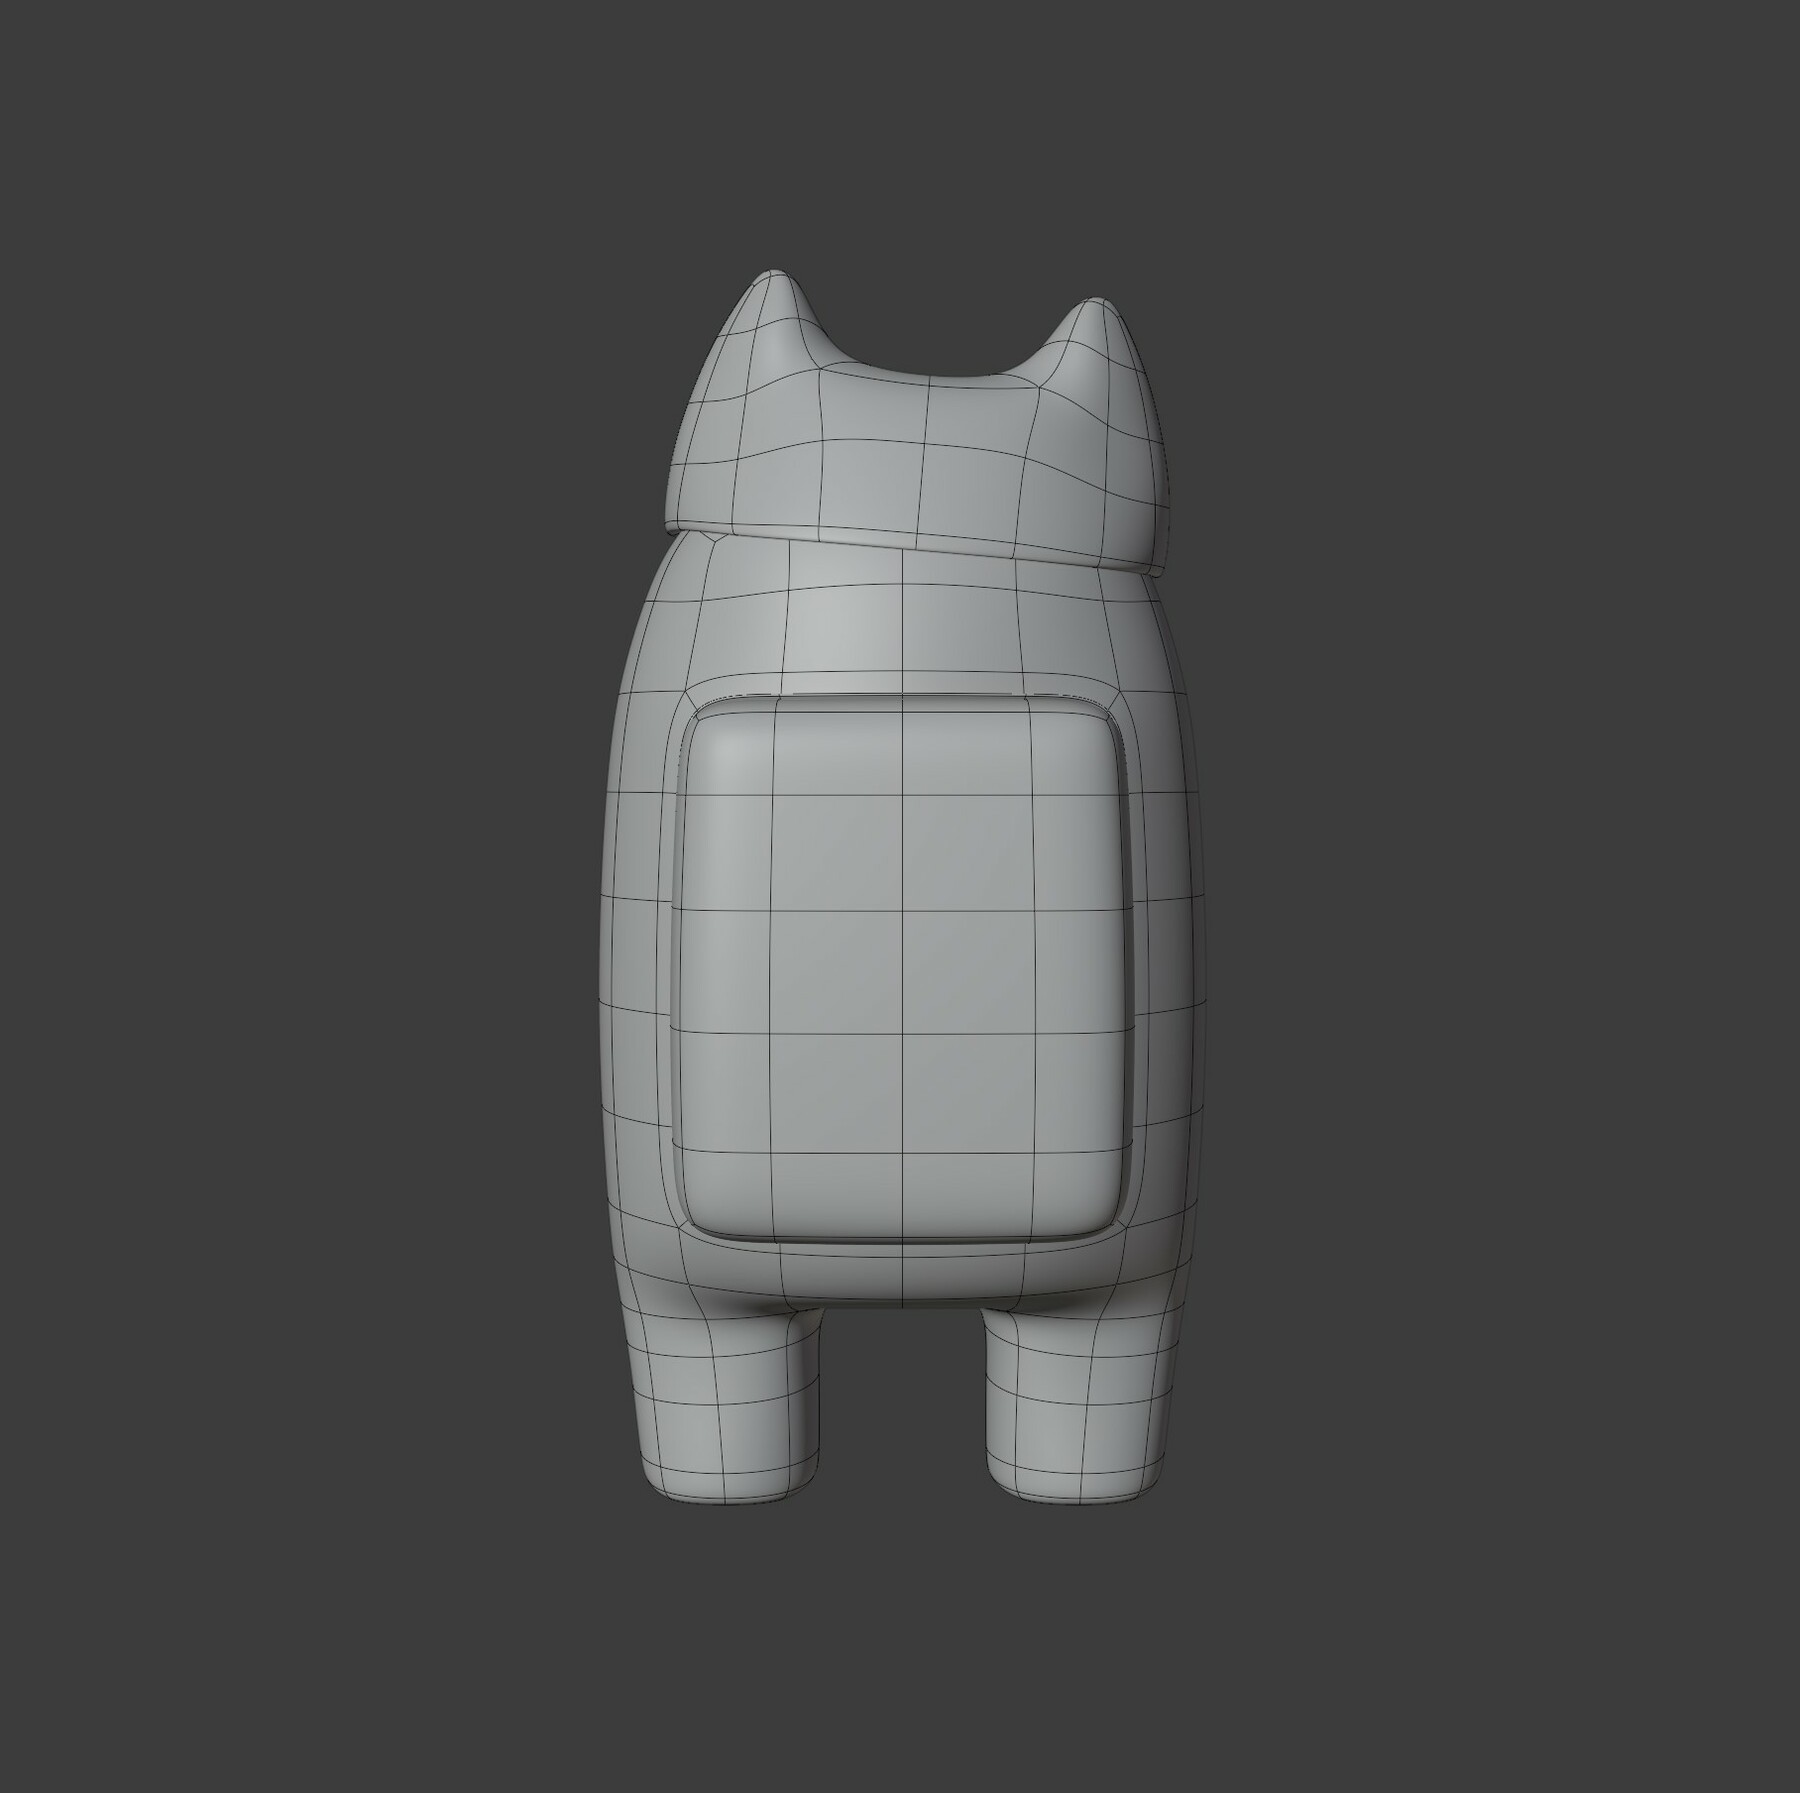 ArtStation - Among Us Cat Head Hat Character | Game Assets